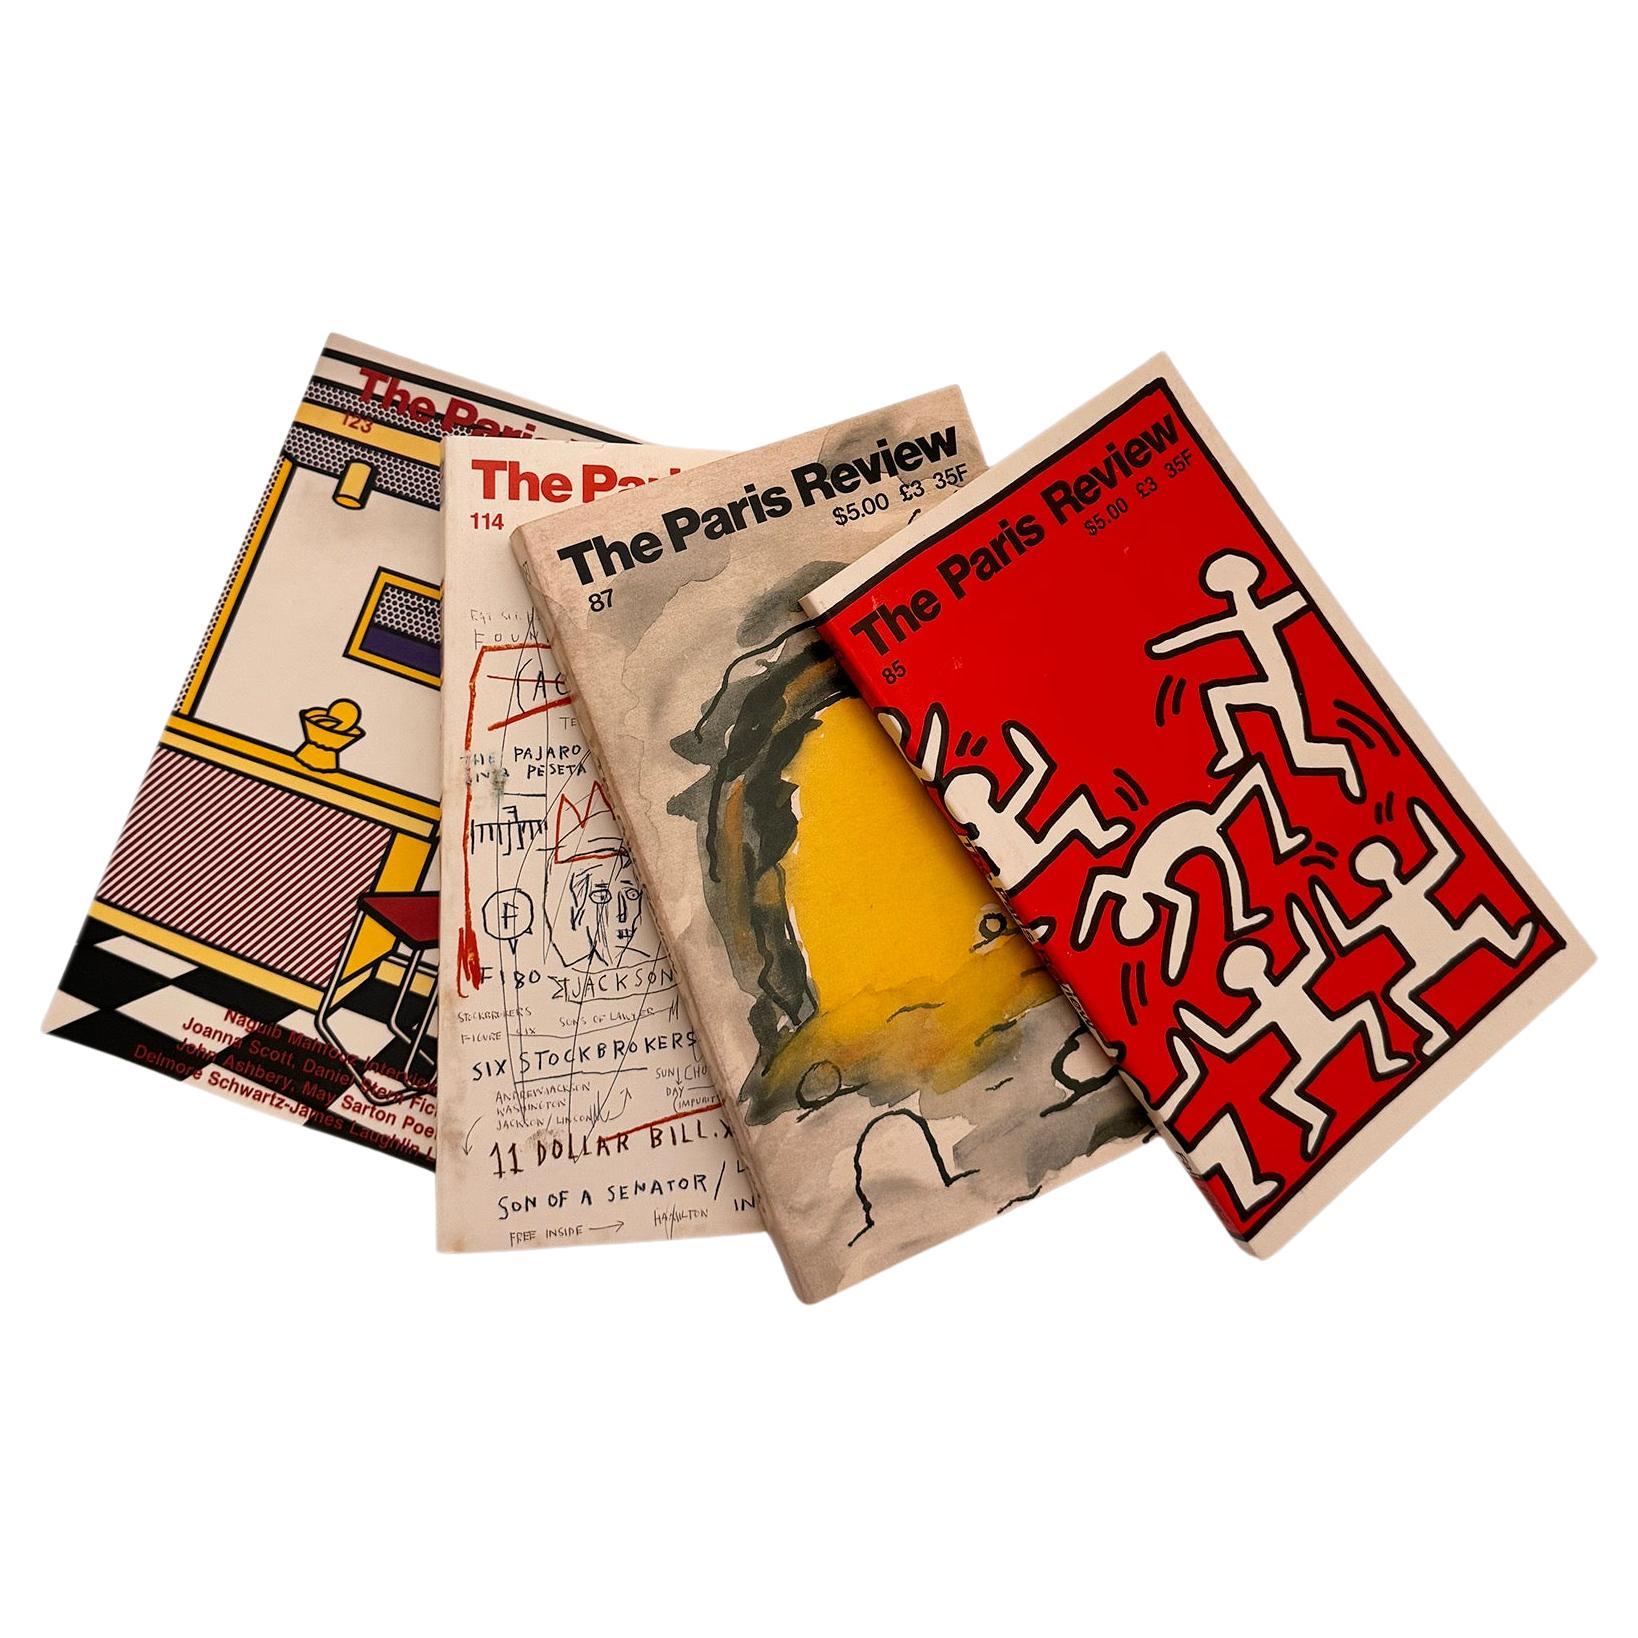 Jean-Michel Basquiat, Keith Haring, Roy Lichtenstein: The Paris Review 1982-1992:

Vintage editions of The Paris Review, with one uniquely featuring an 1983 interior spread of Jean-Michel Basquiat's 